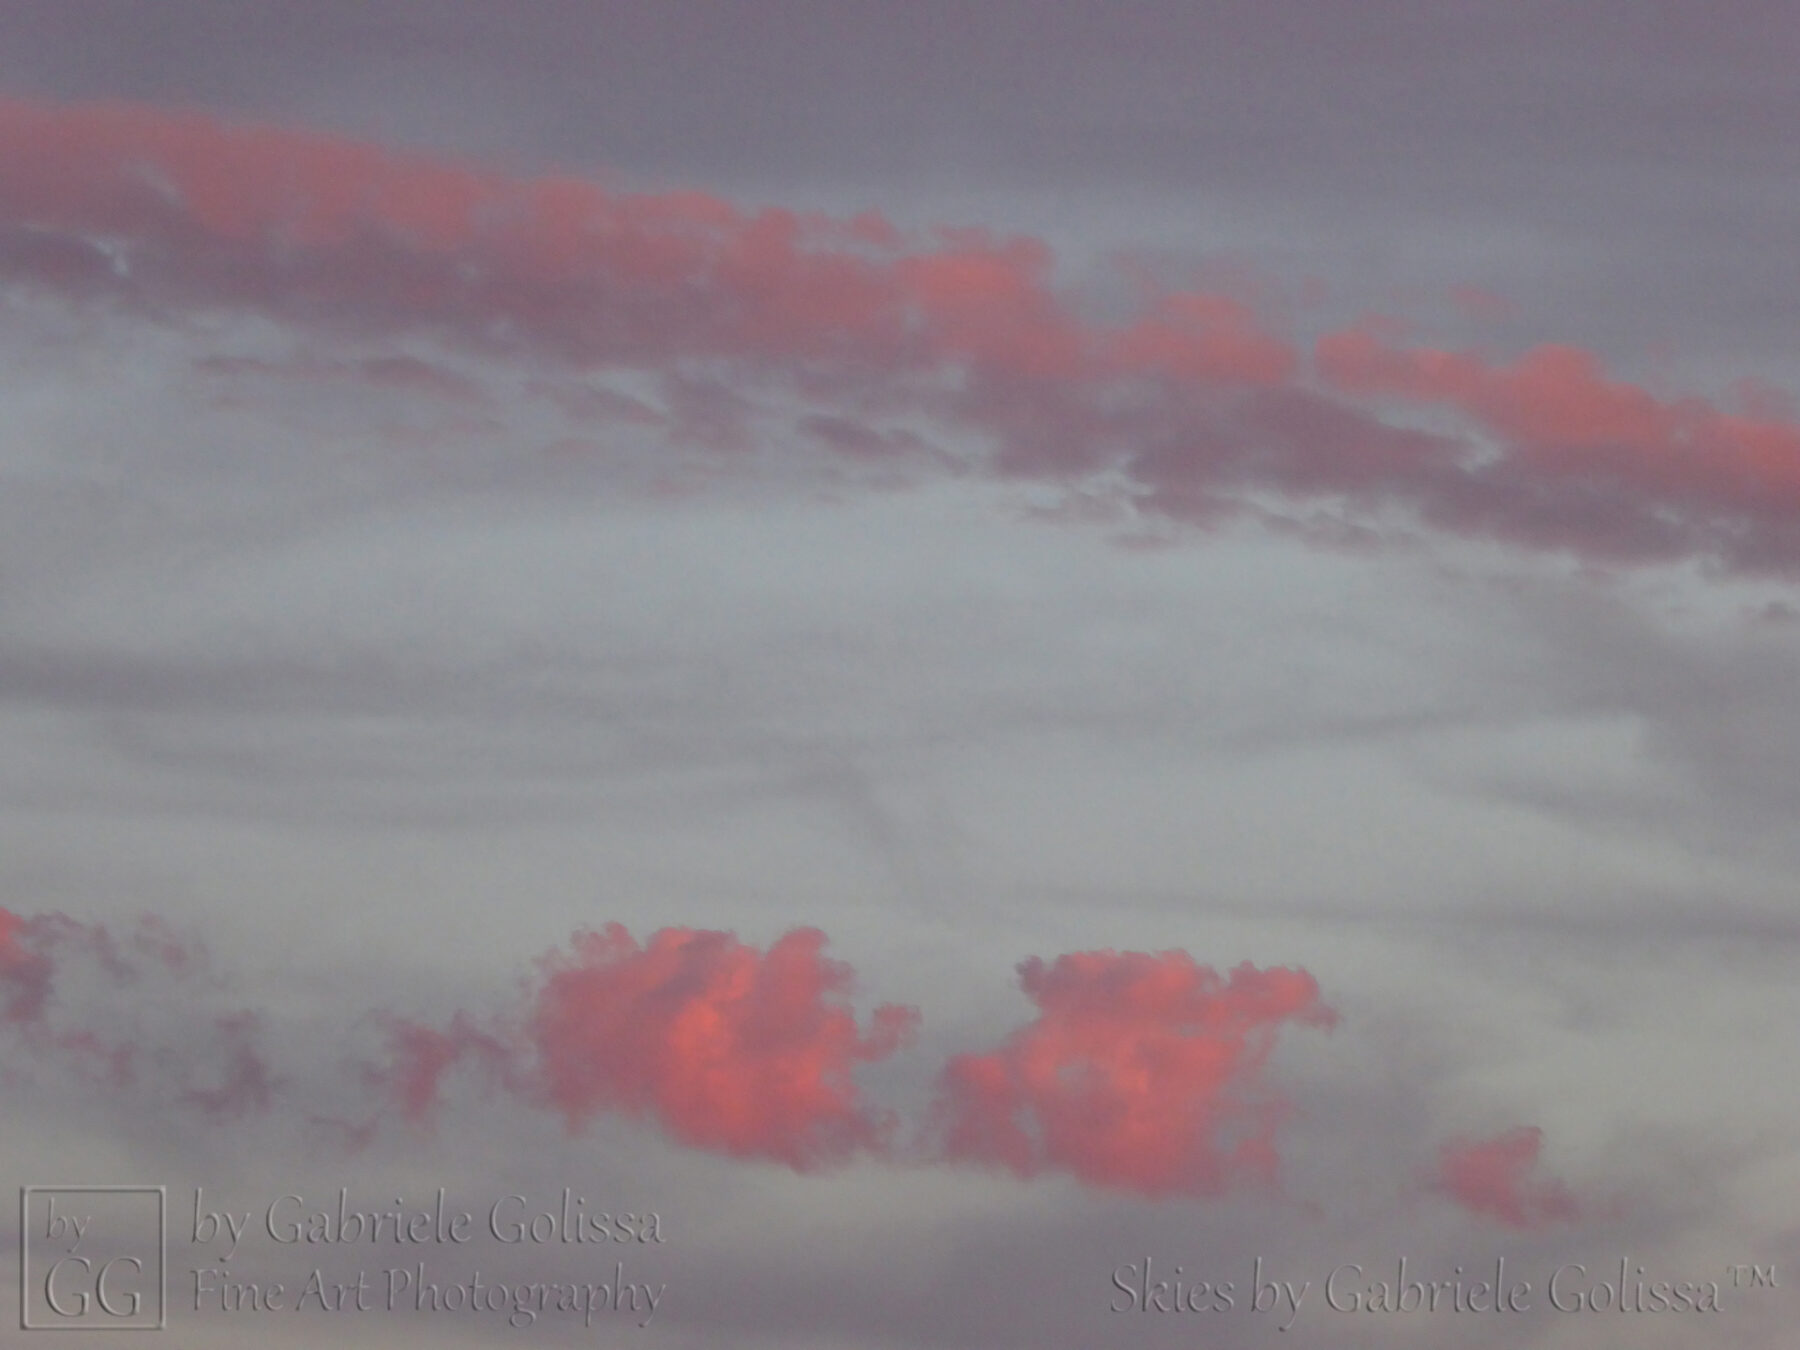 Clouds of Love and Passion (3)